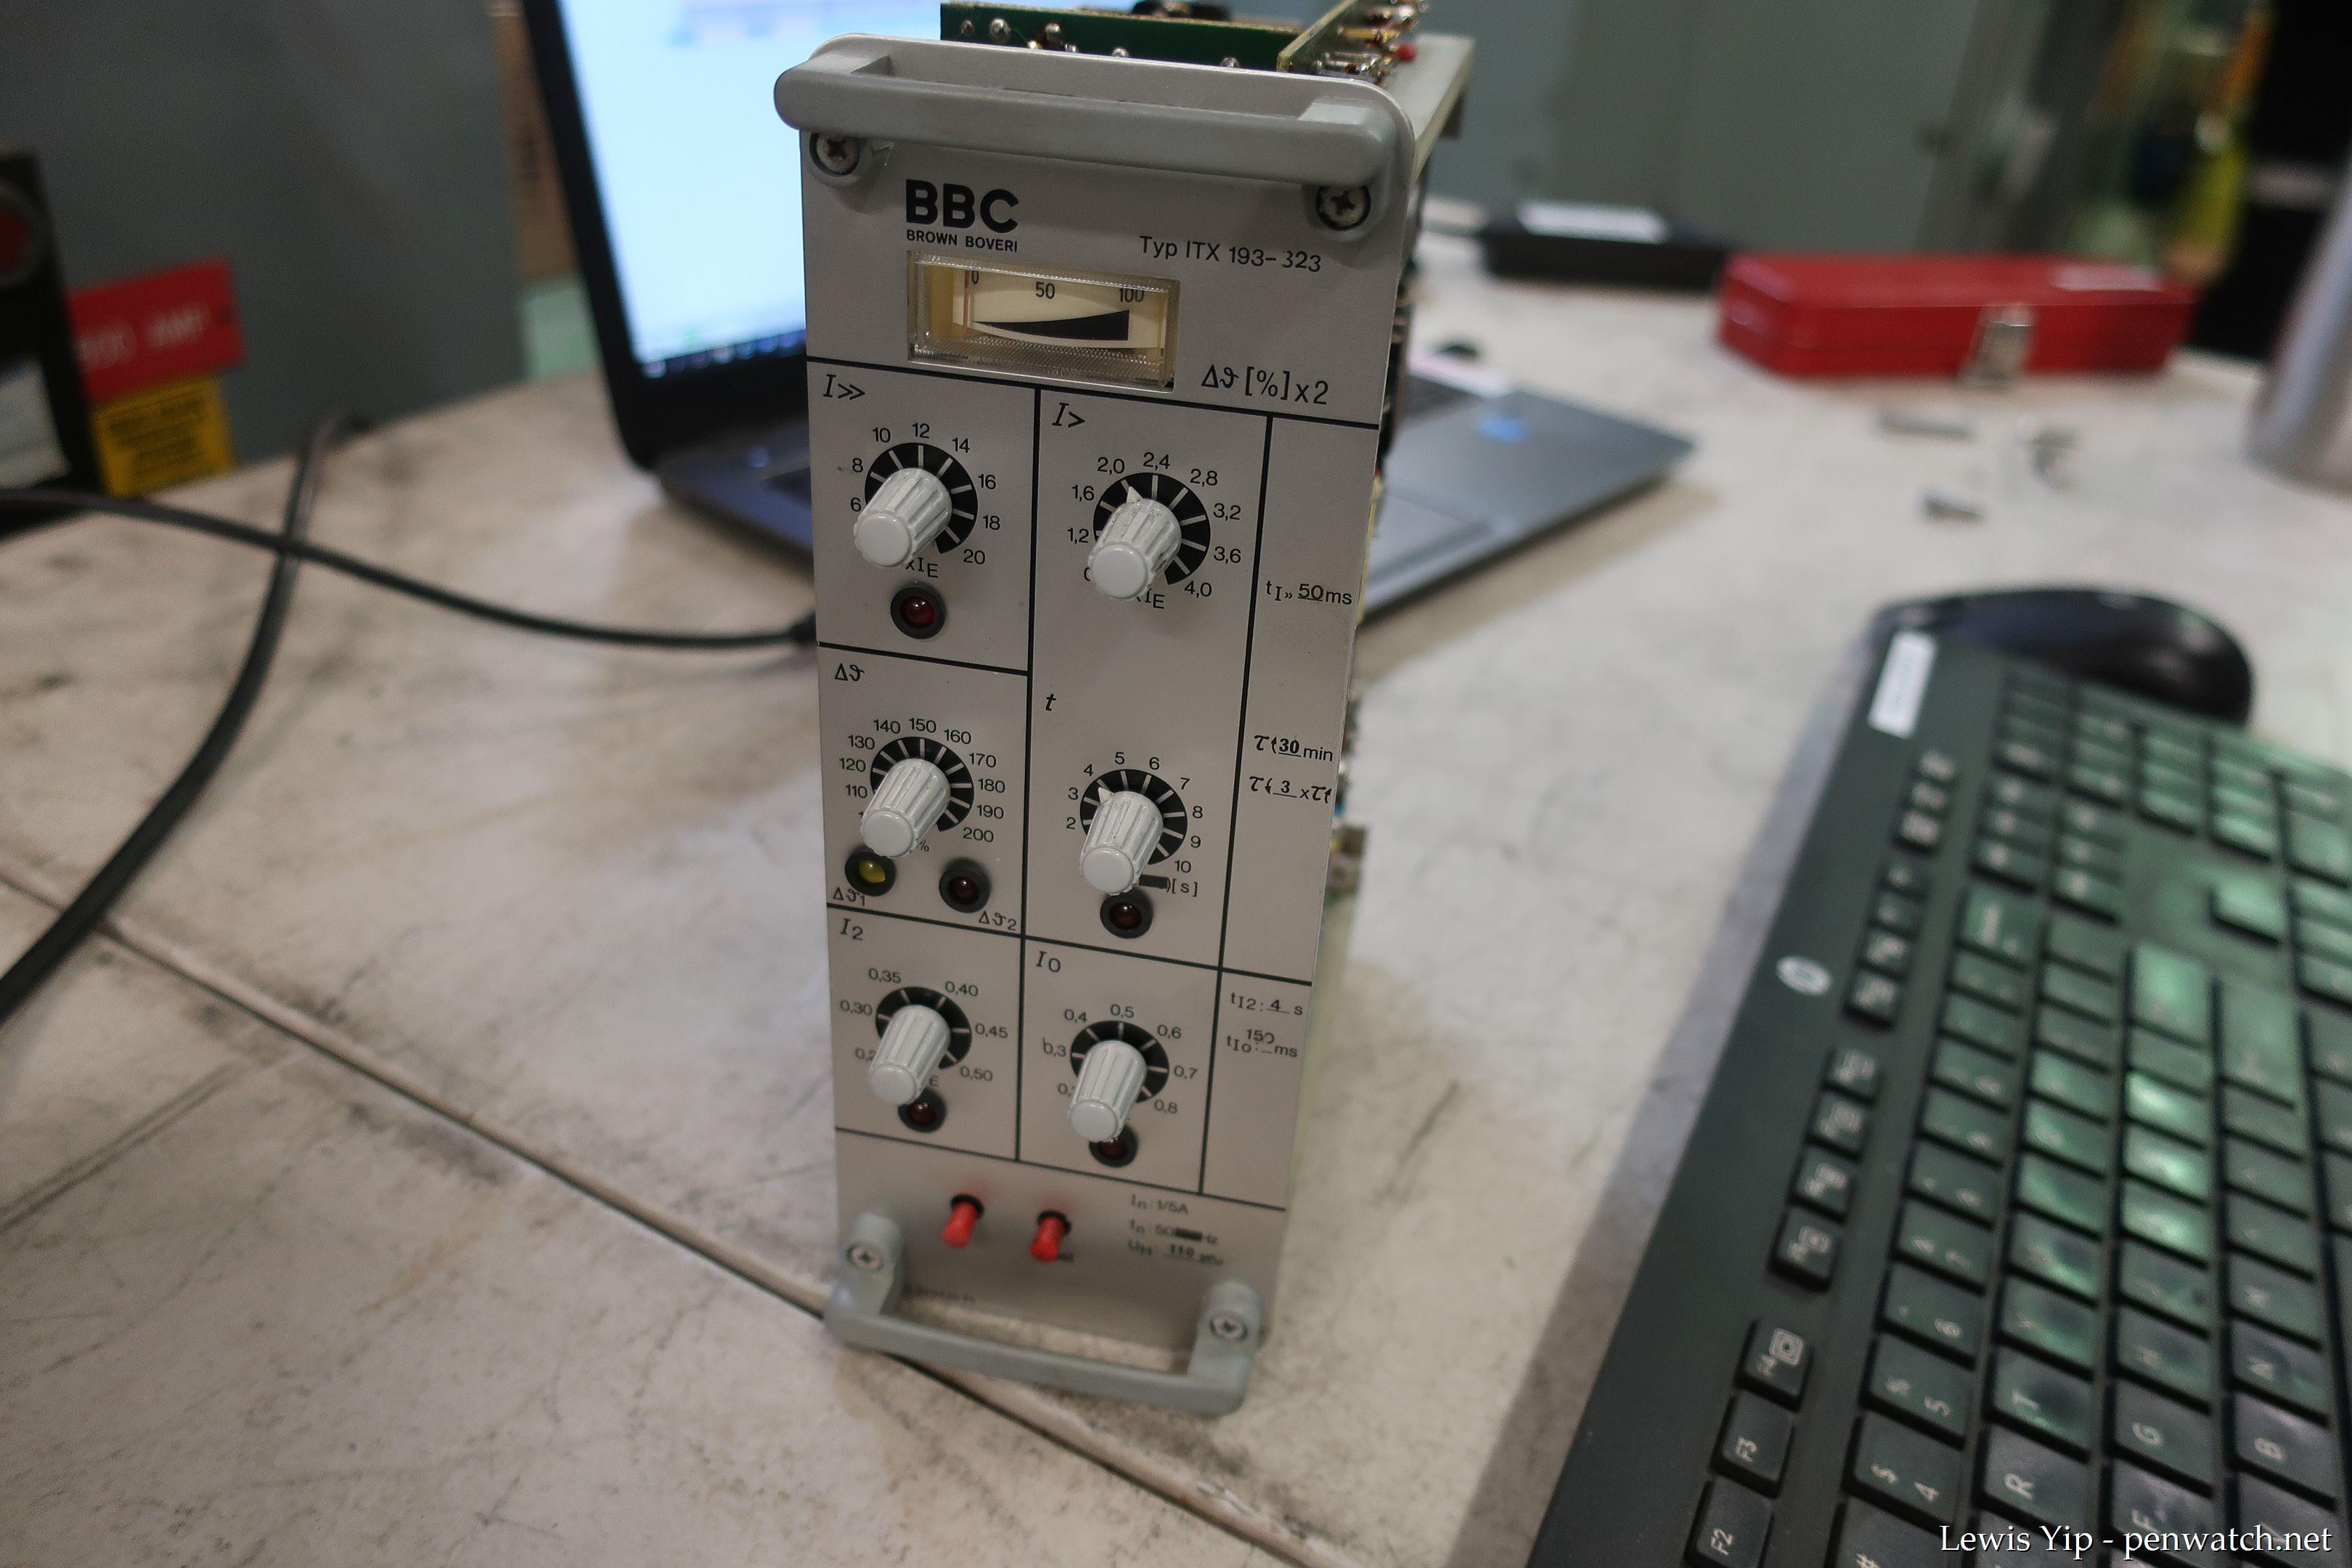 A front view of the BBC ITX 193 motor protection relay